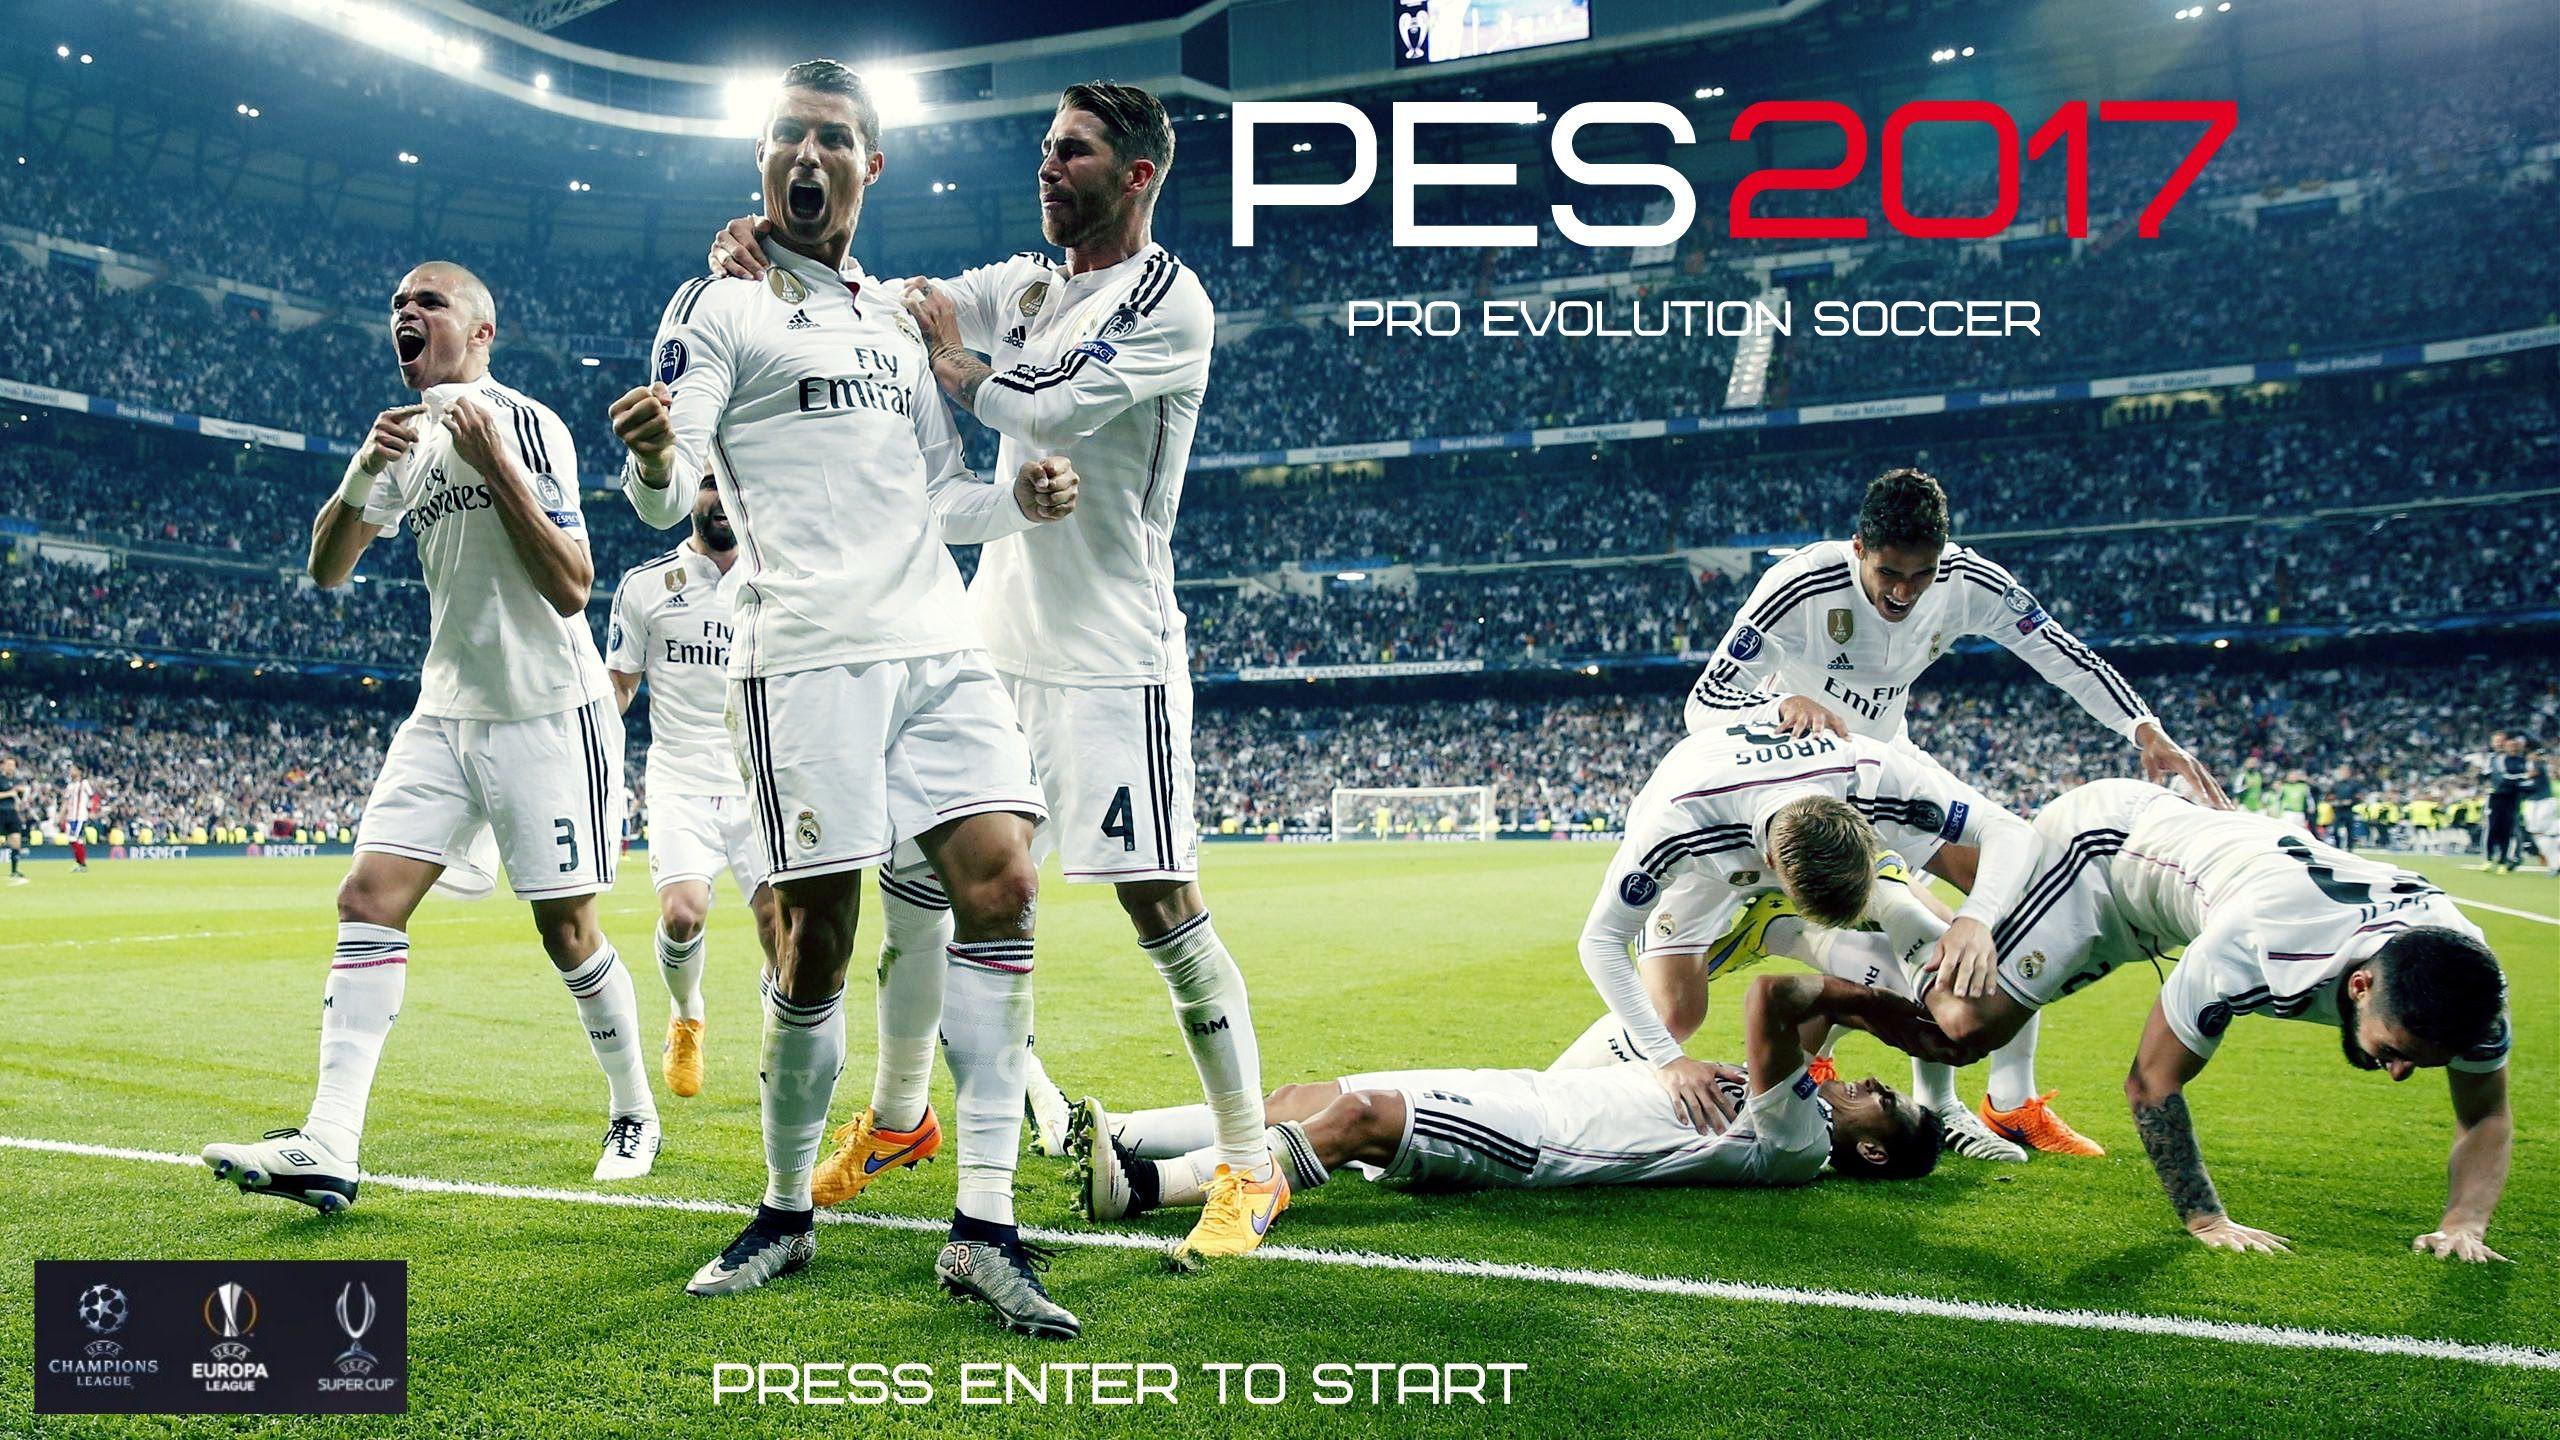 PES 2018 Real first official gameplay and trailer. Football is